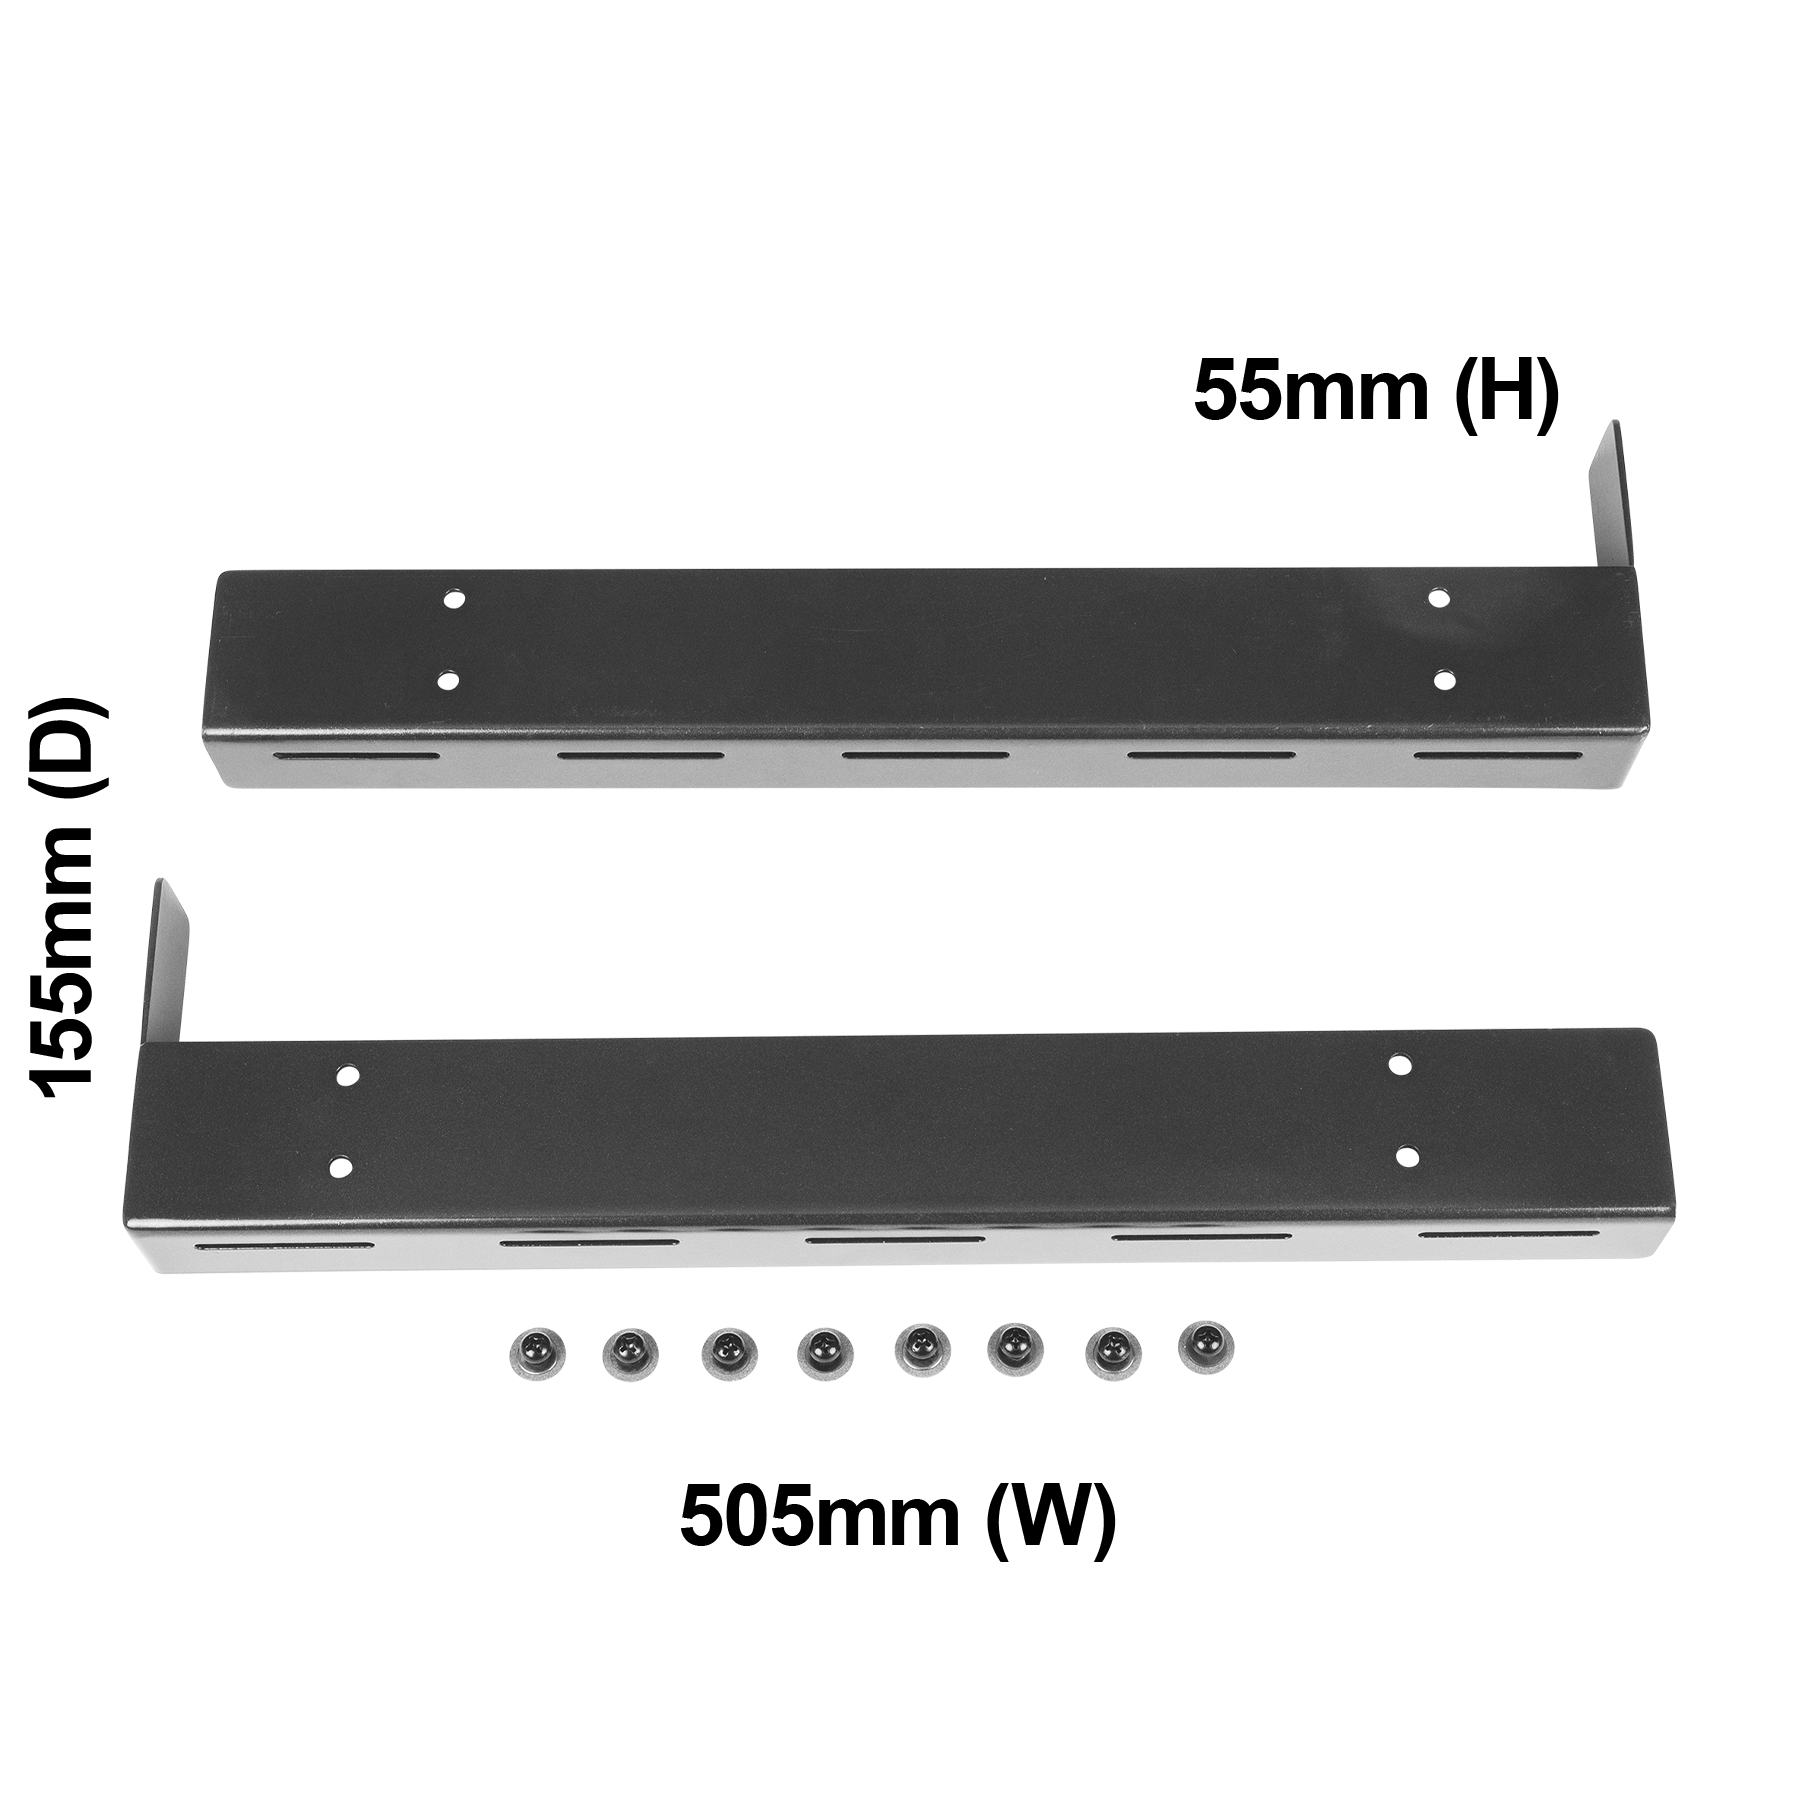 /globalassets/0-spareparts/skubd23107-bracket-for-discovery-1100r-top.png